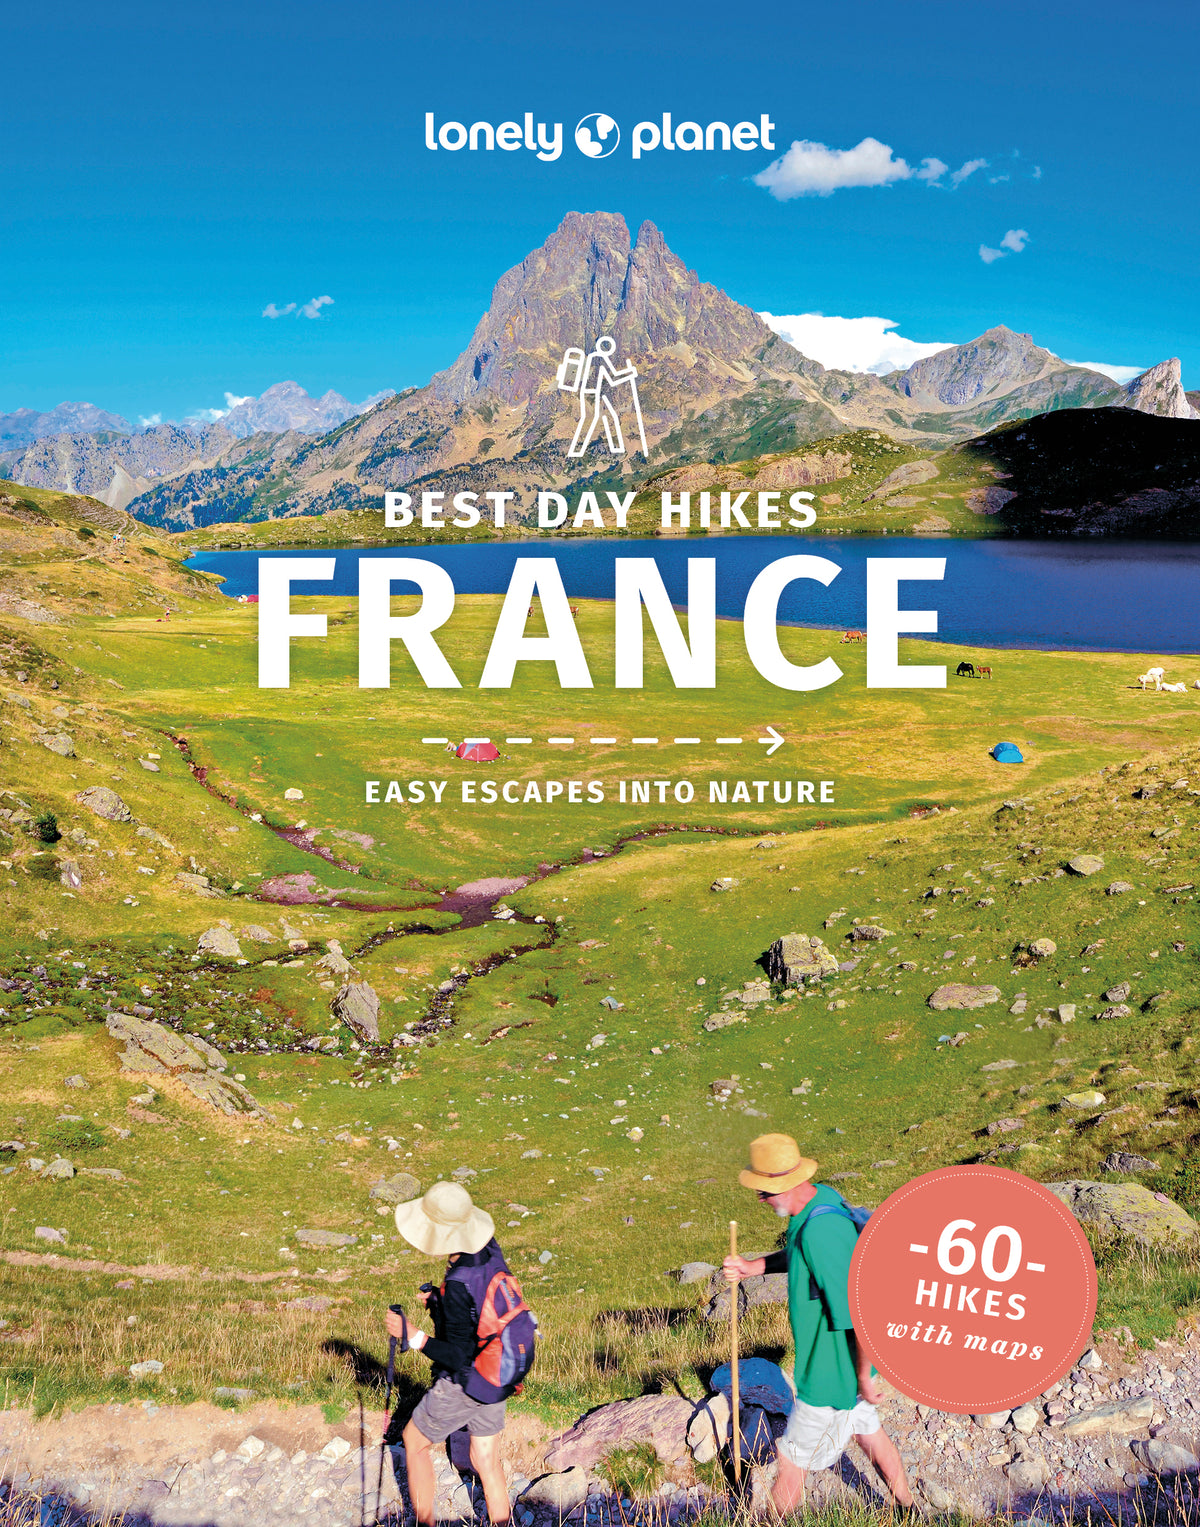 Best Day Hikes France Travel Guide